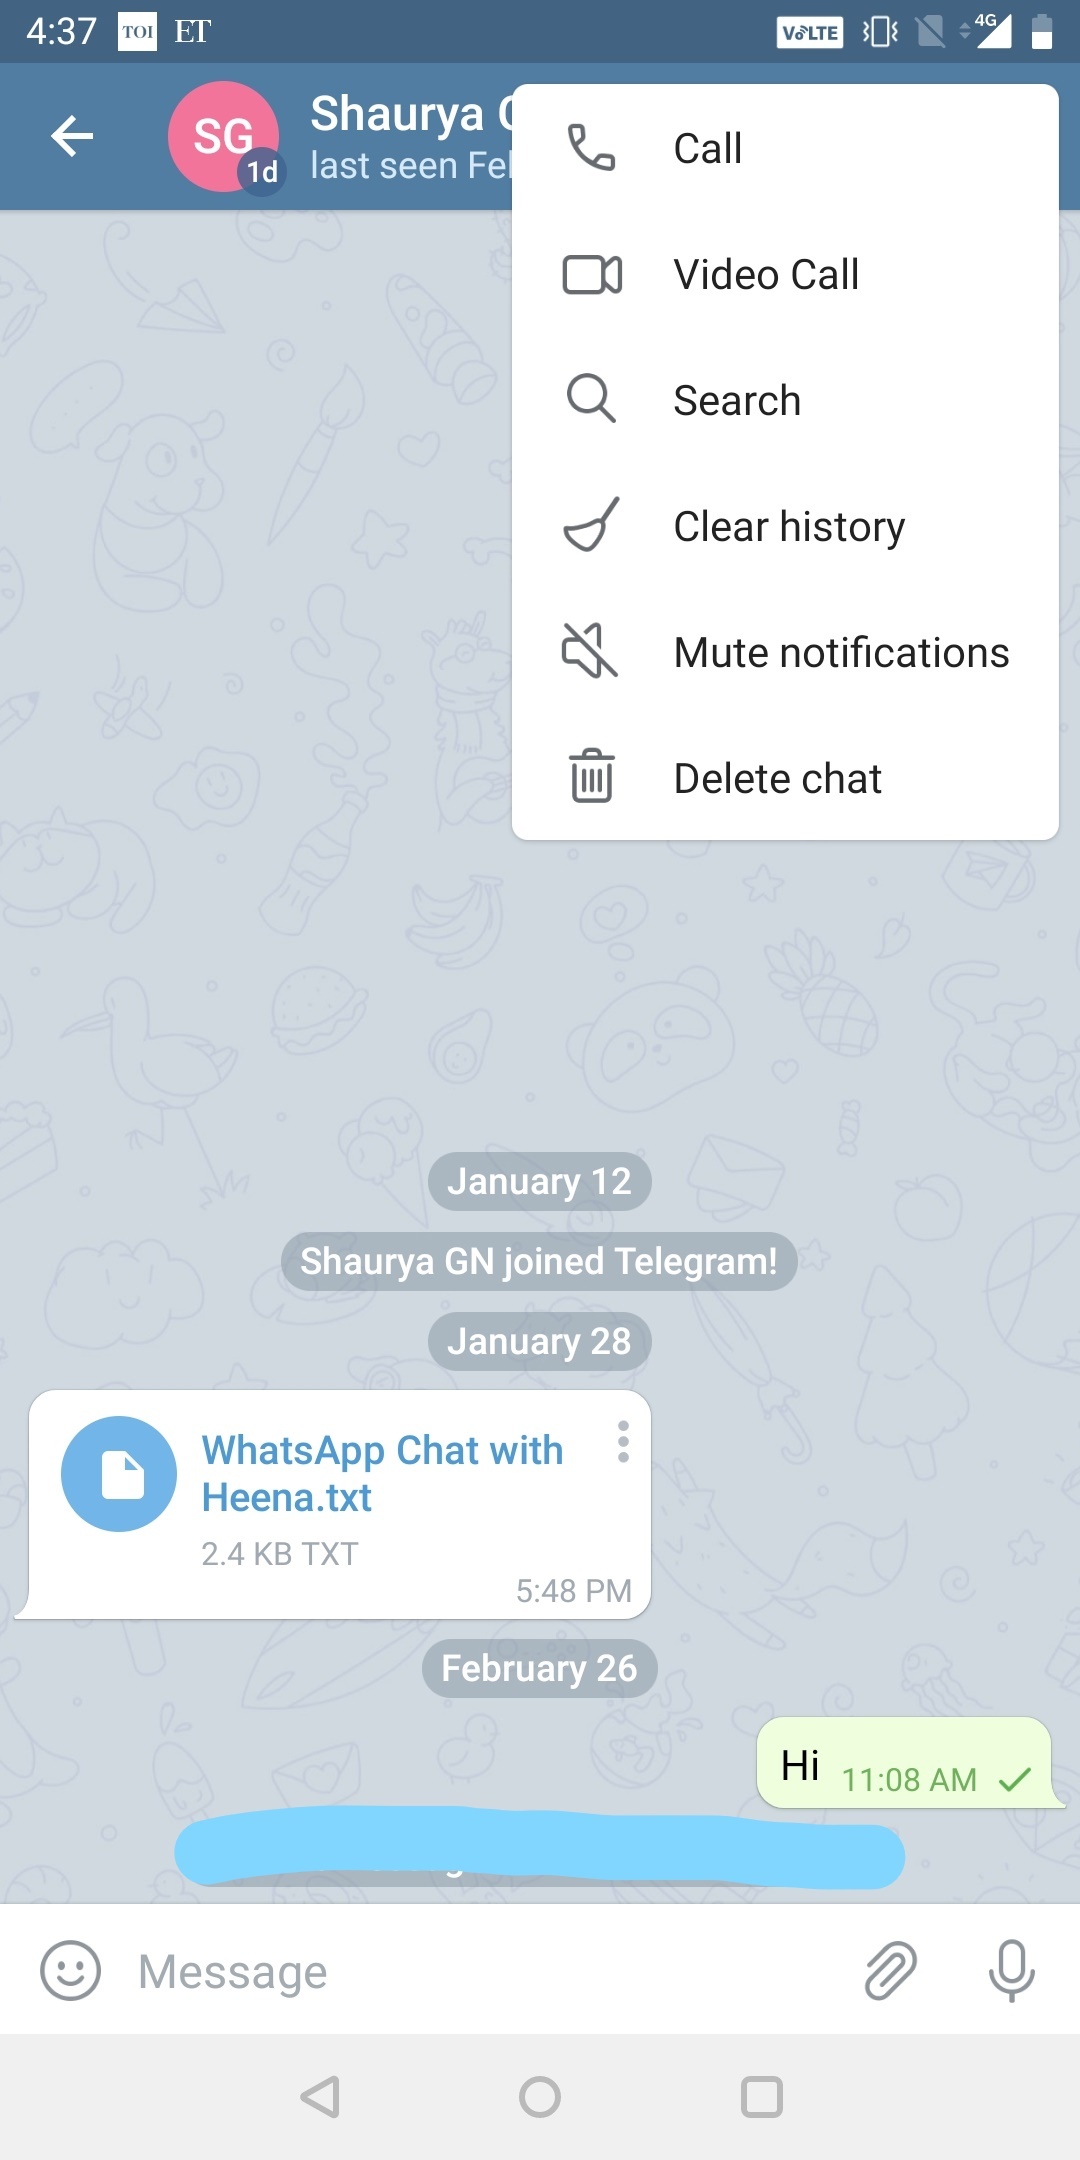 How to enable auto-delete feature on Telegram 1